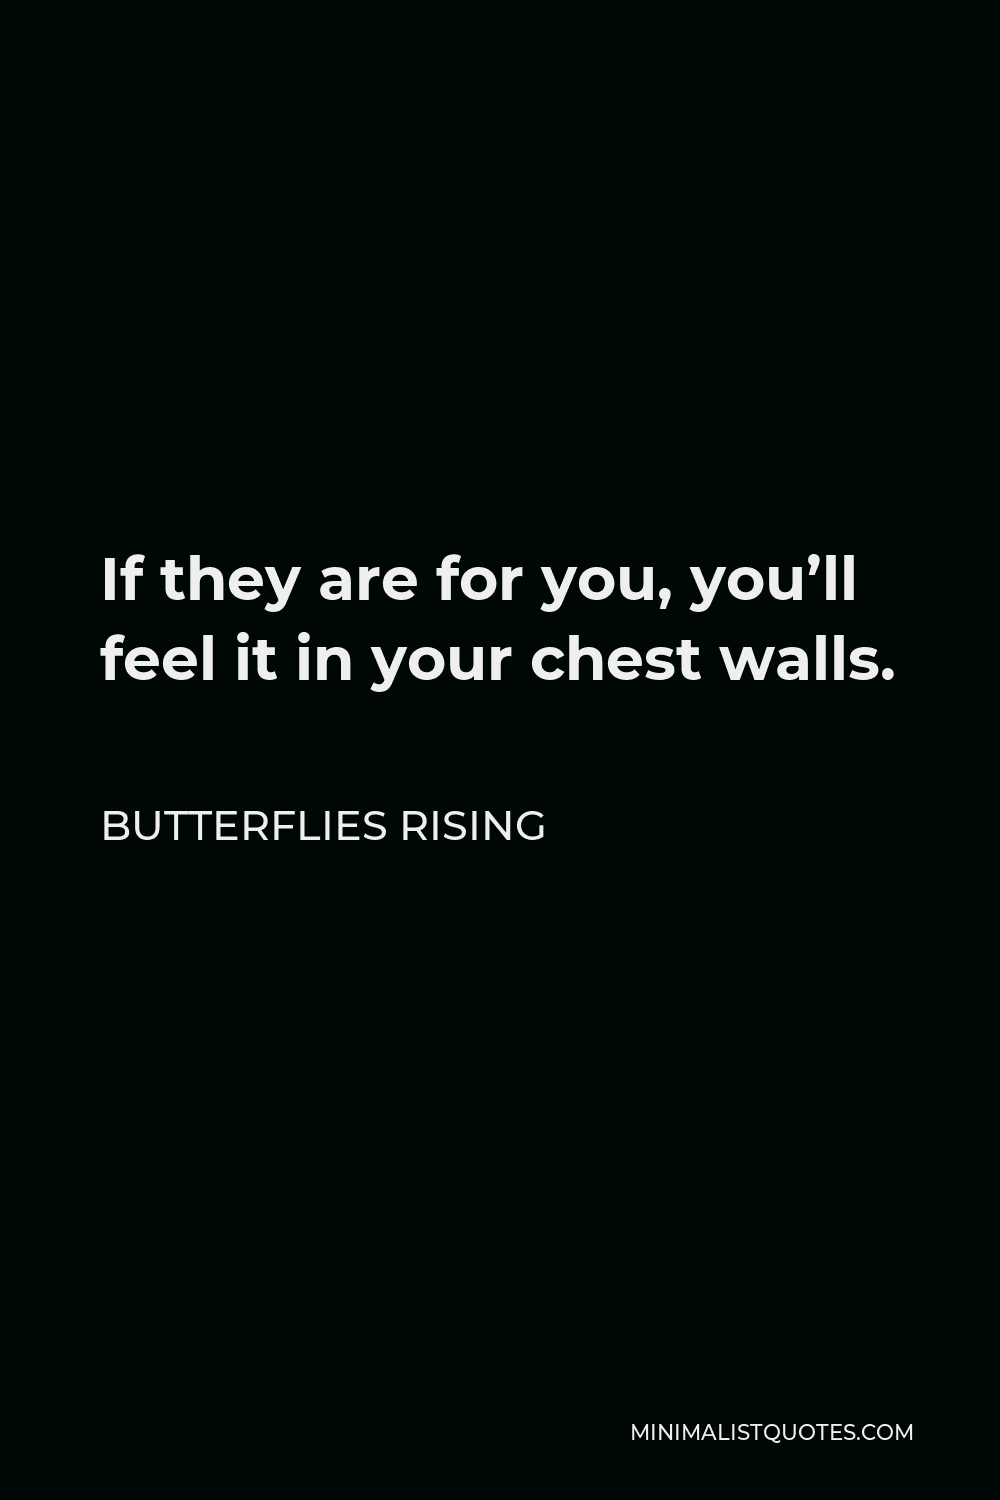 Butterflies Rising Quote - If they are for you, you’ll feel it in your chest walls.